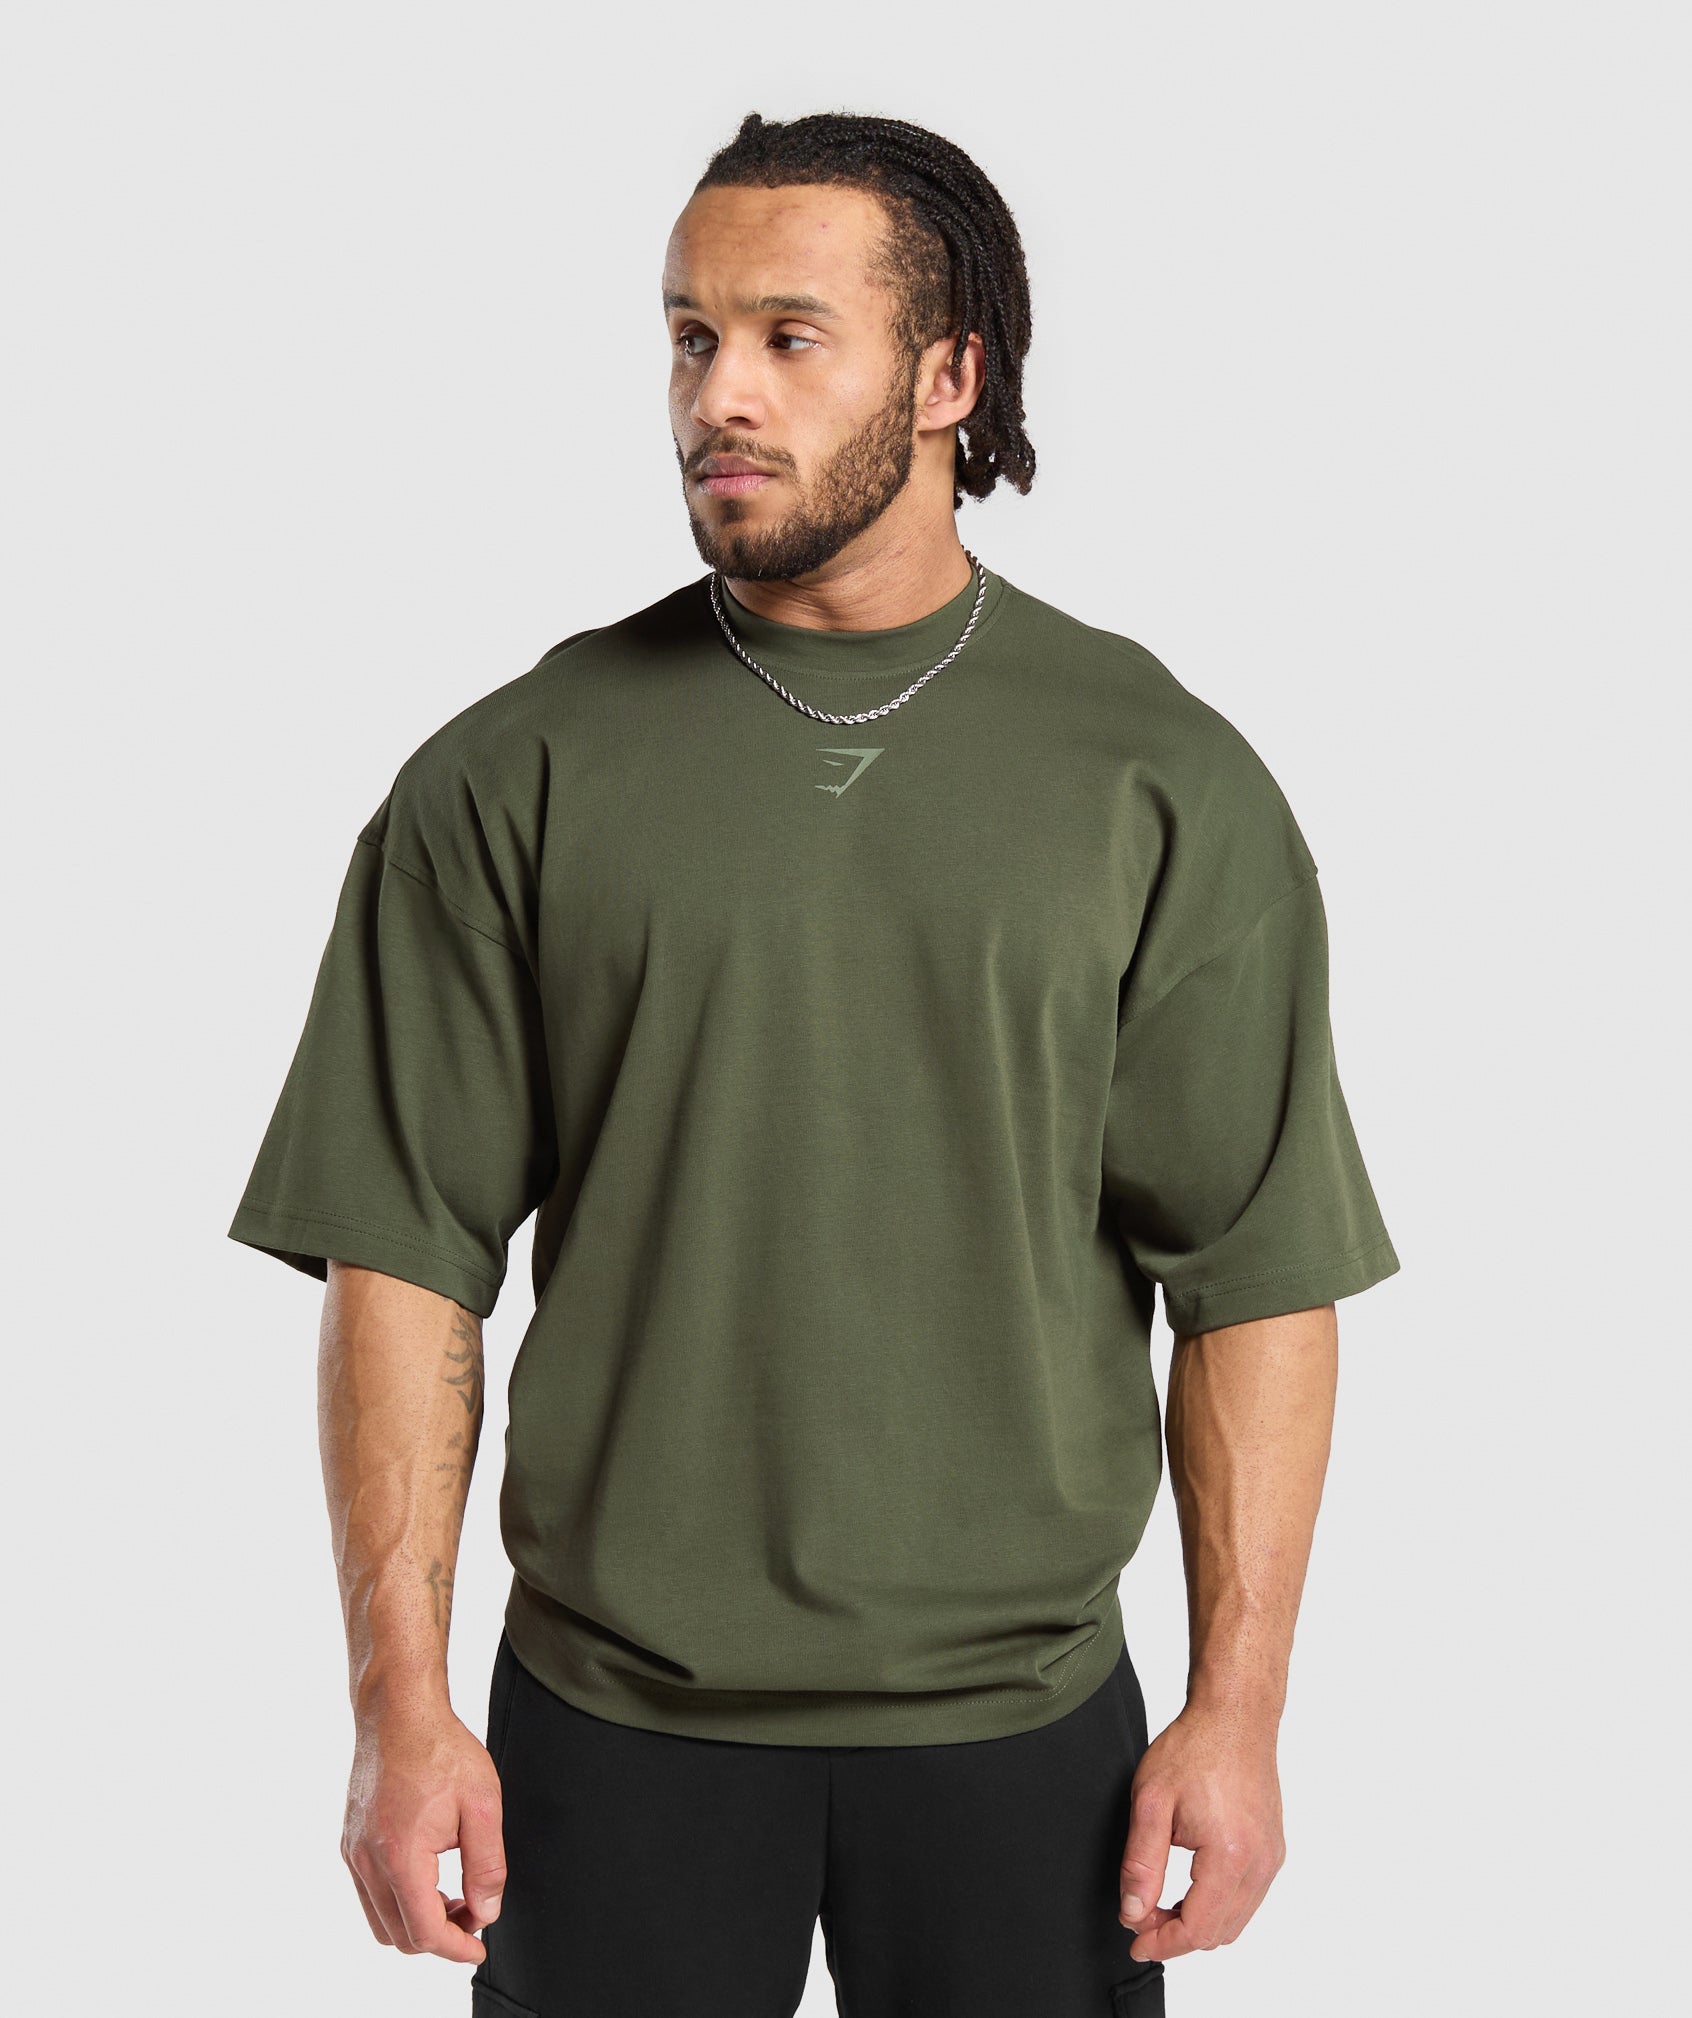 Sets N Reps T-Shirt in Winter Olive - view 2